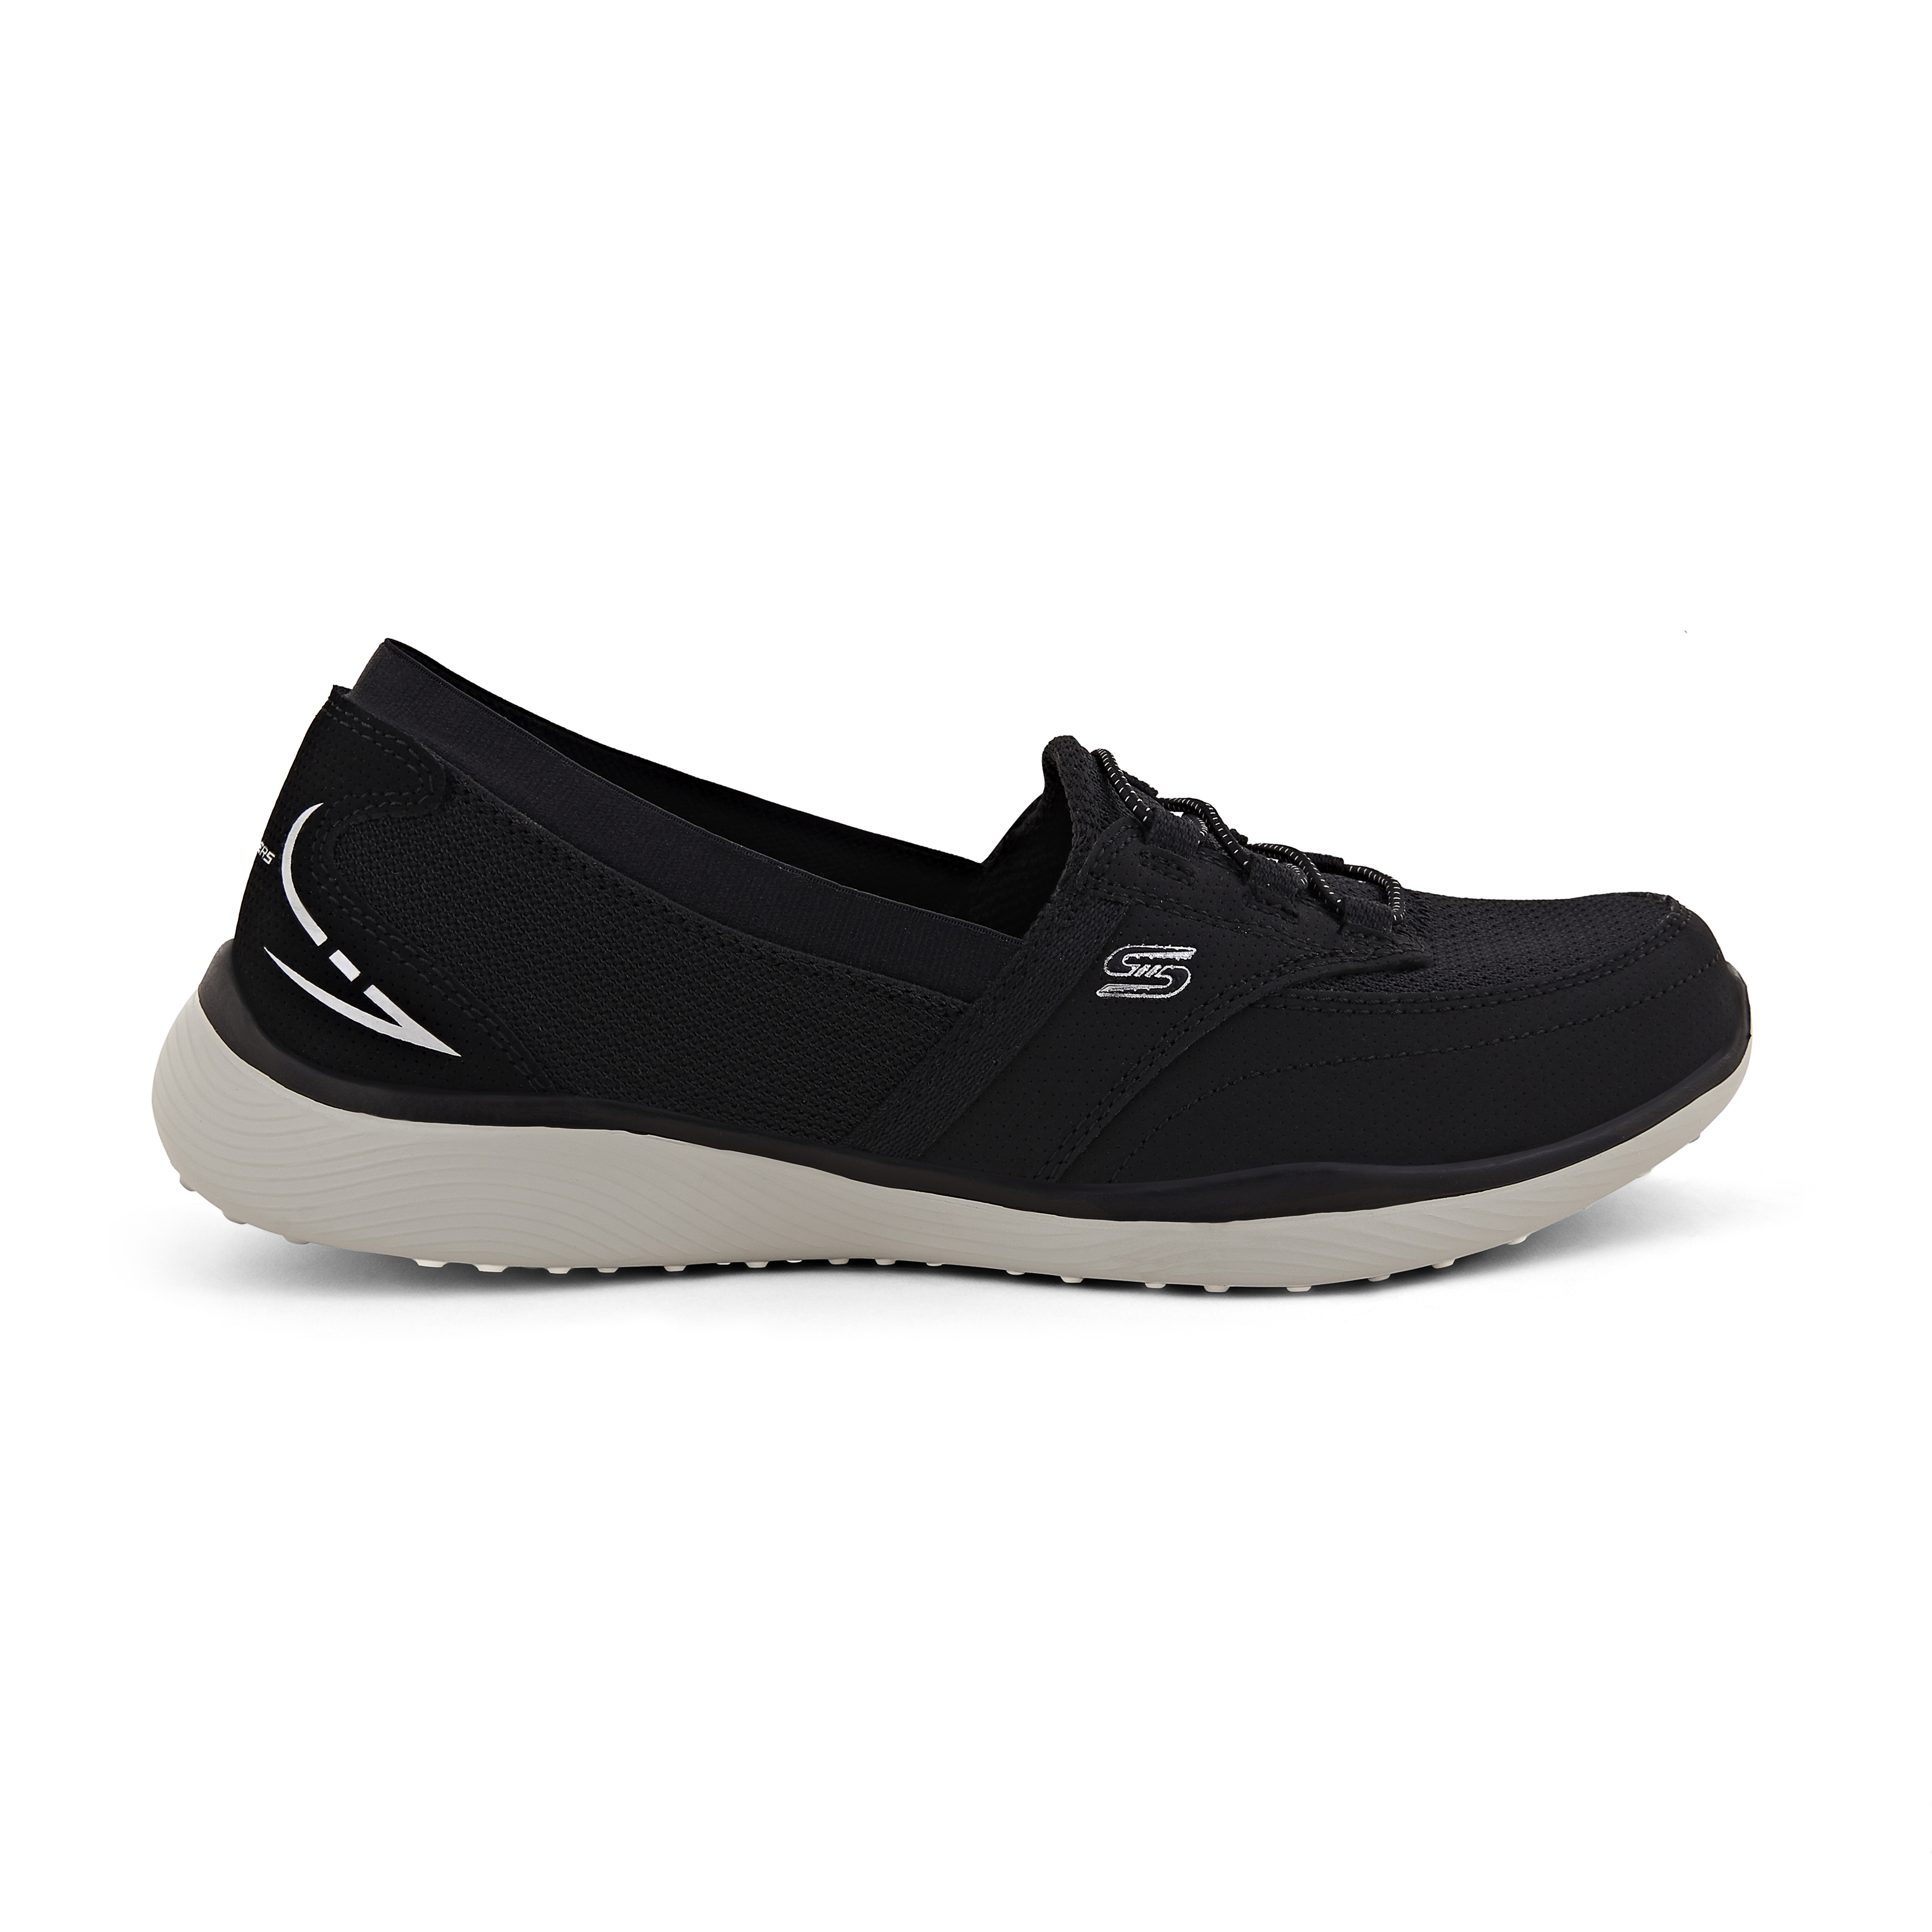 MICROBURST 2.0 - SAVVY POISE, BLACK/WHITE Footwear Right View